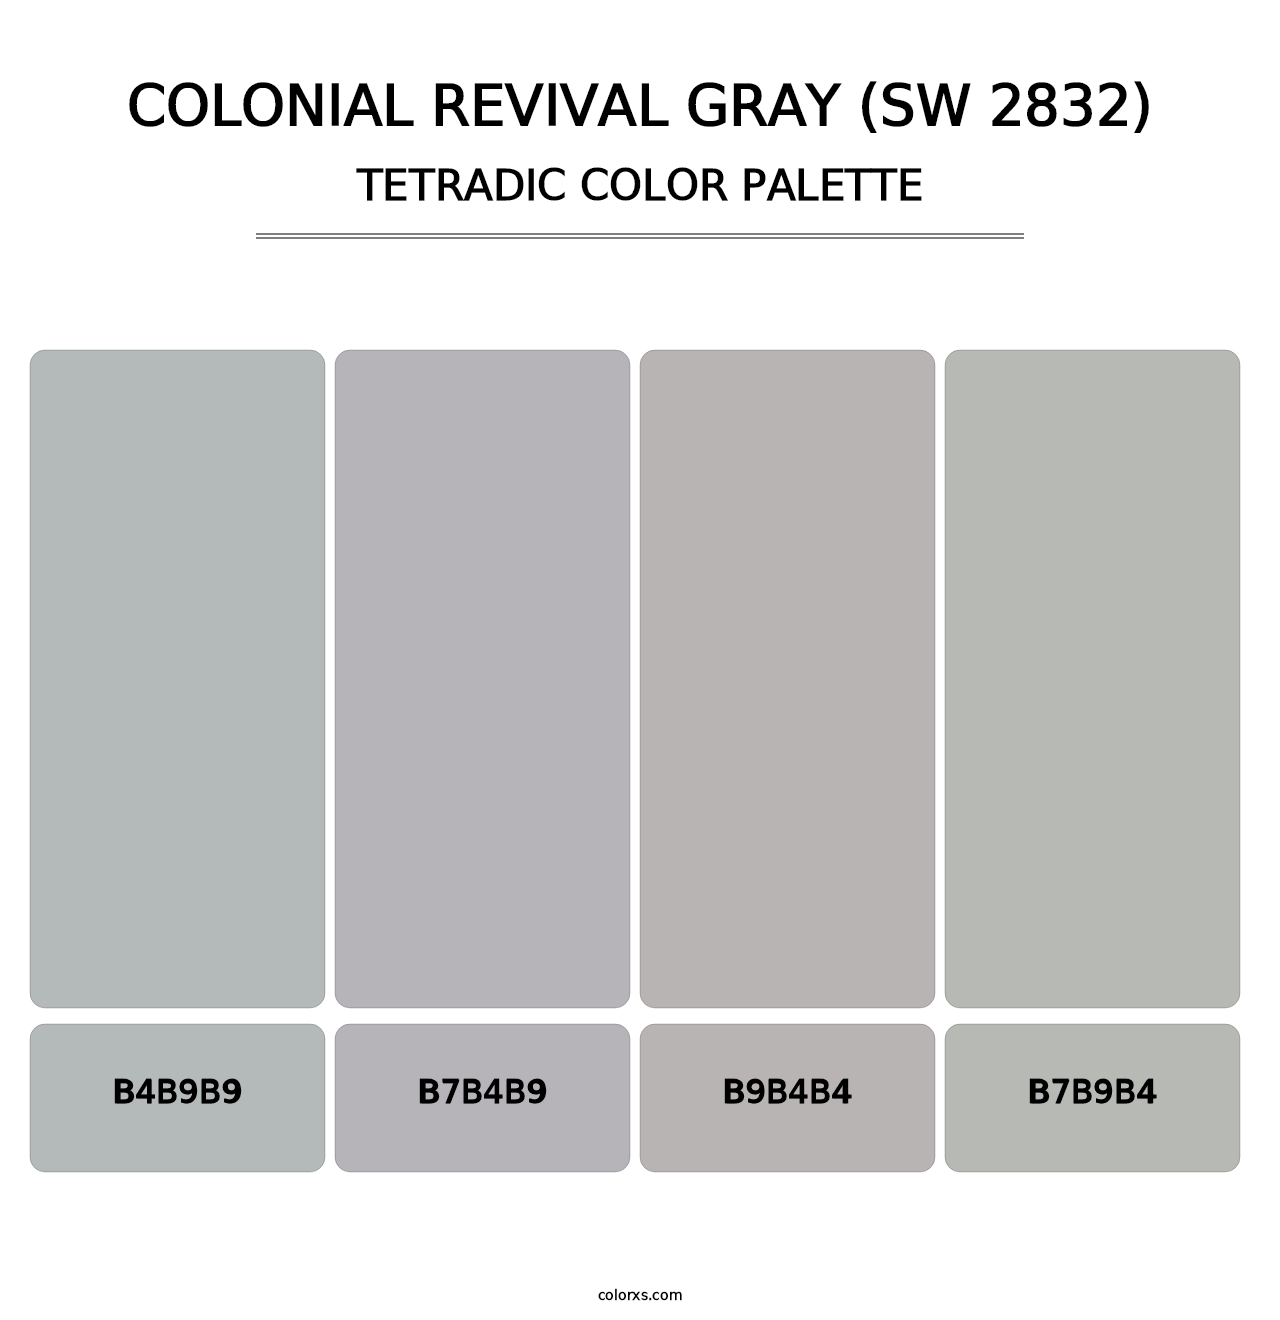 Colonial Revival Gray (SW 2832) - Tetradic Color Palette